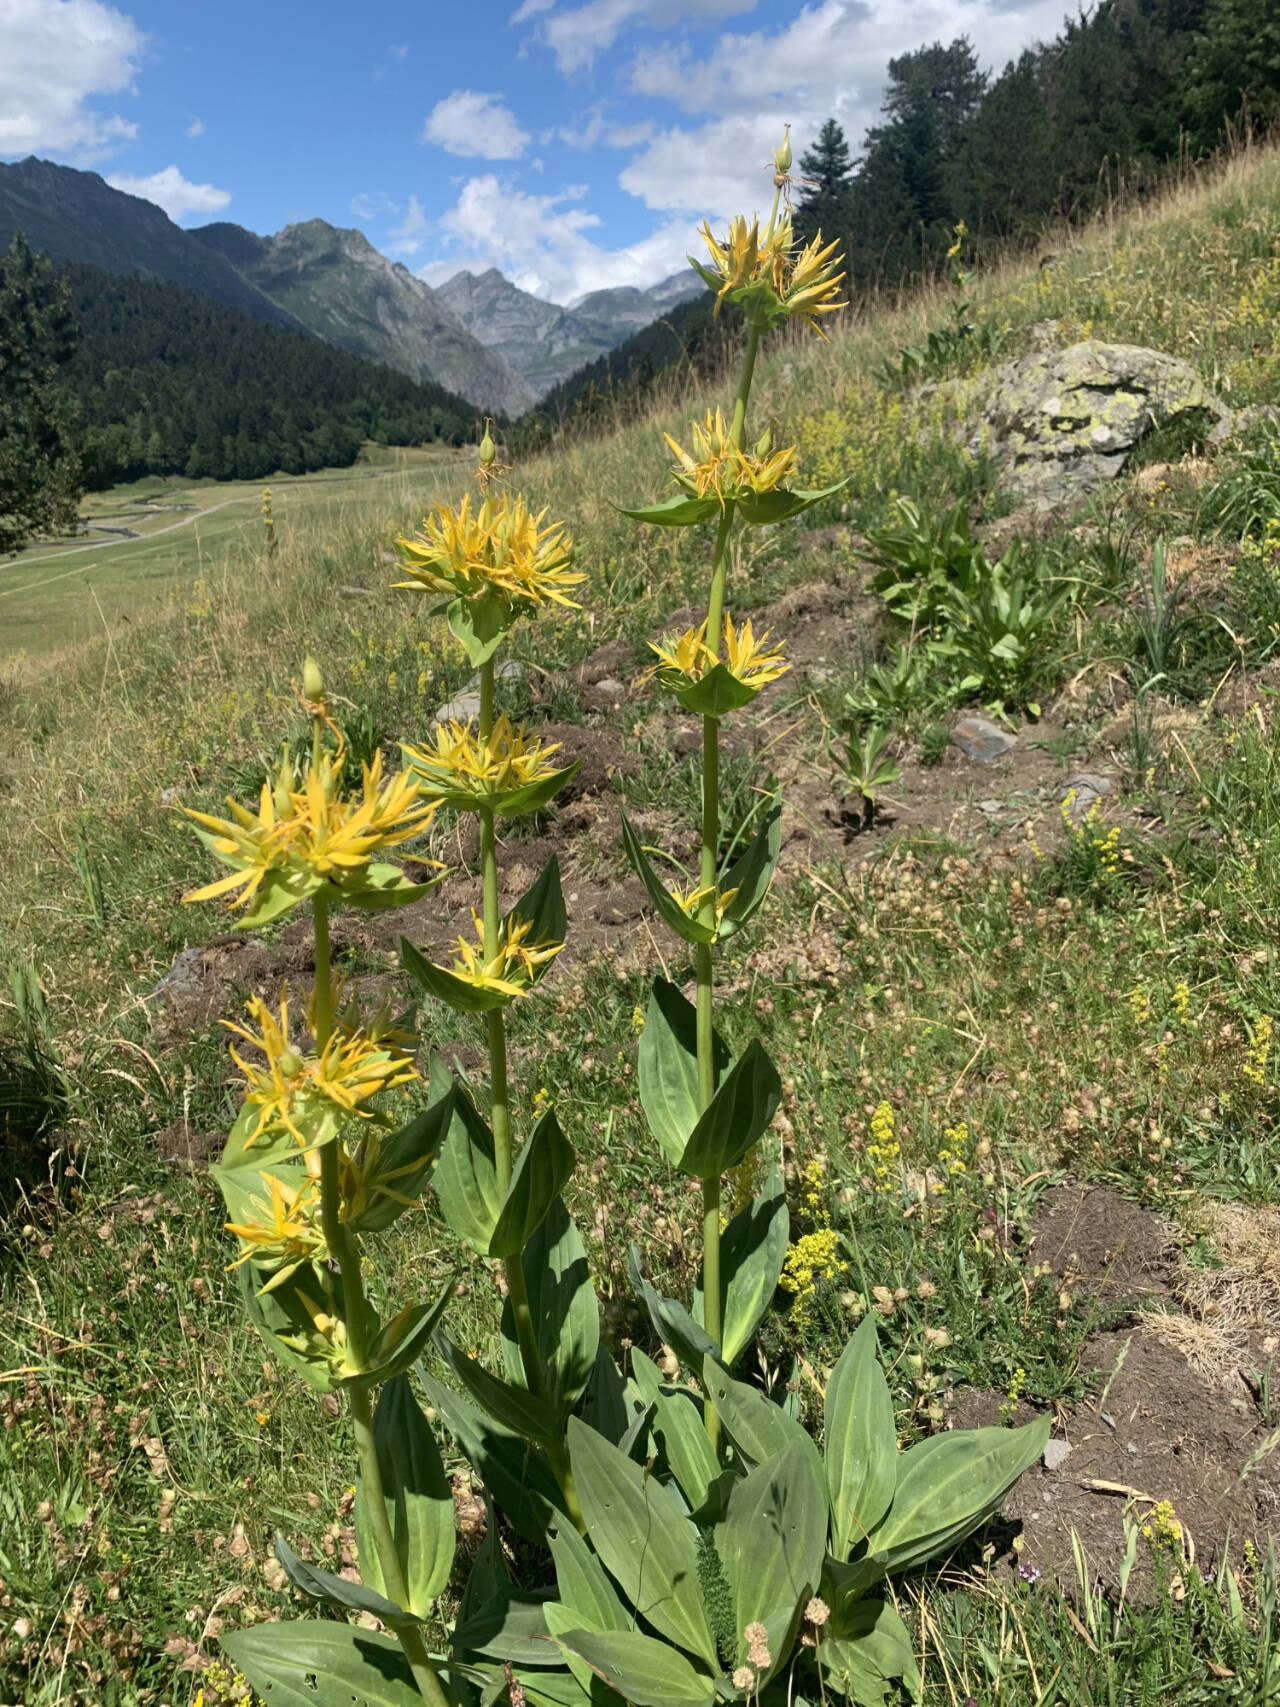 Photo by Carol Bernthal/Adam Henley / Great yellow gentian, whose roots are used to make Suze (a bitter French aperitif), line a trail in the Pyrenees.